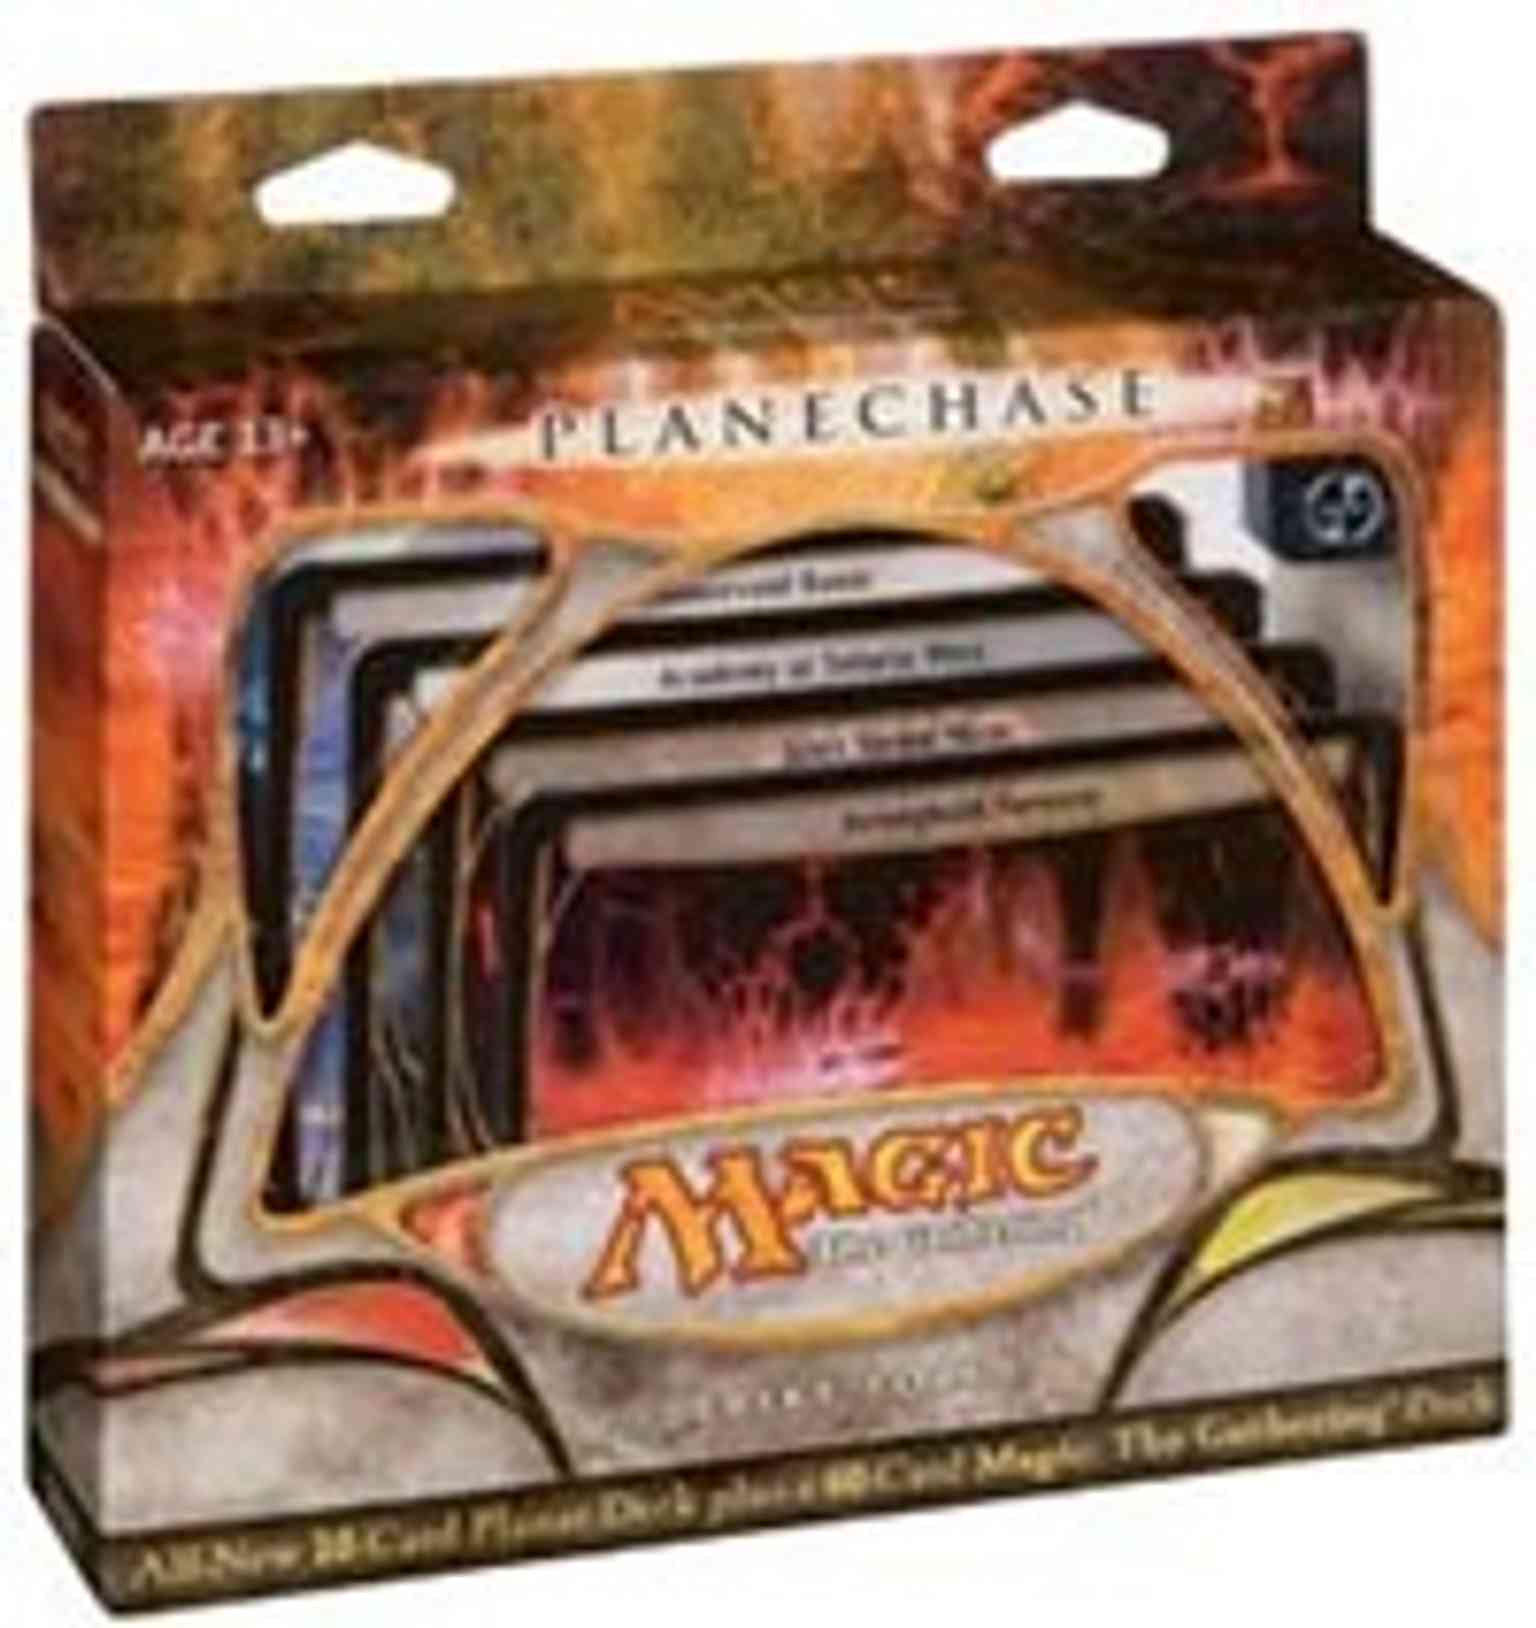 Planechase 2009 - Strike Force Deck magic card front